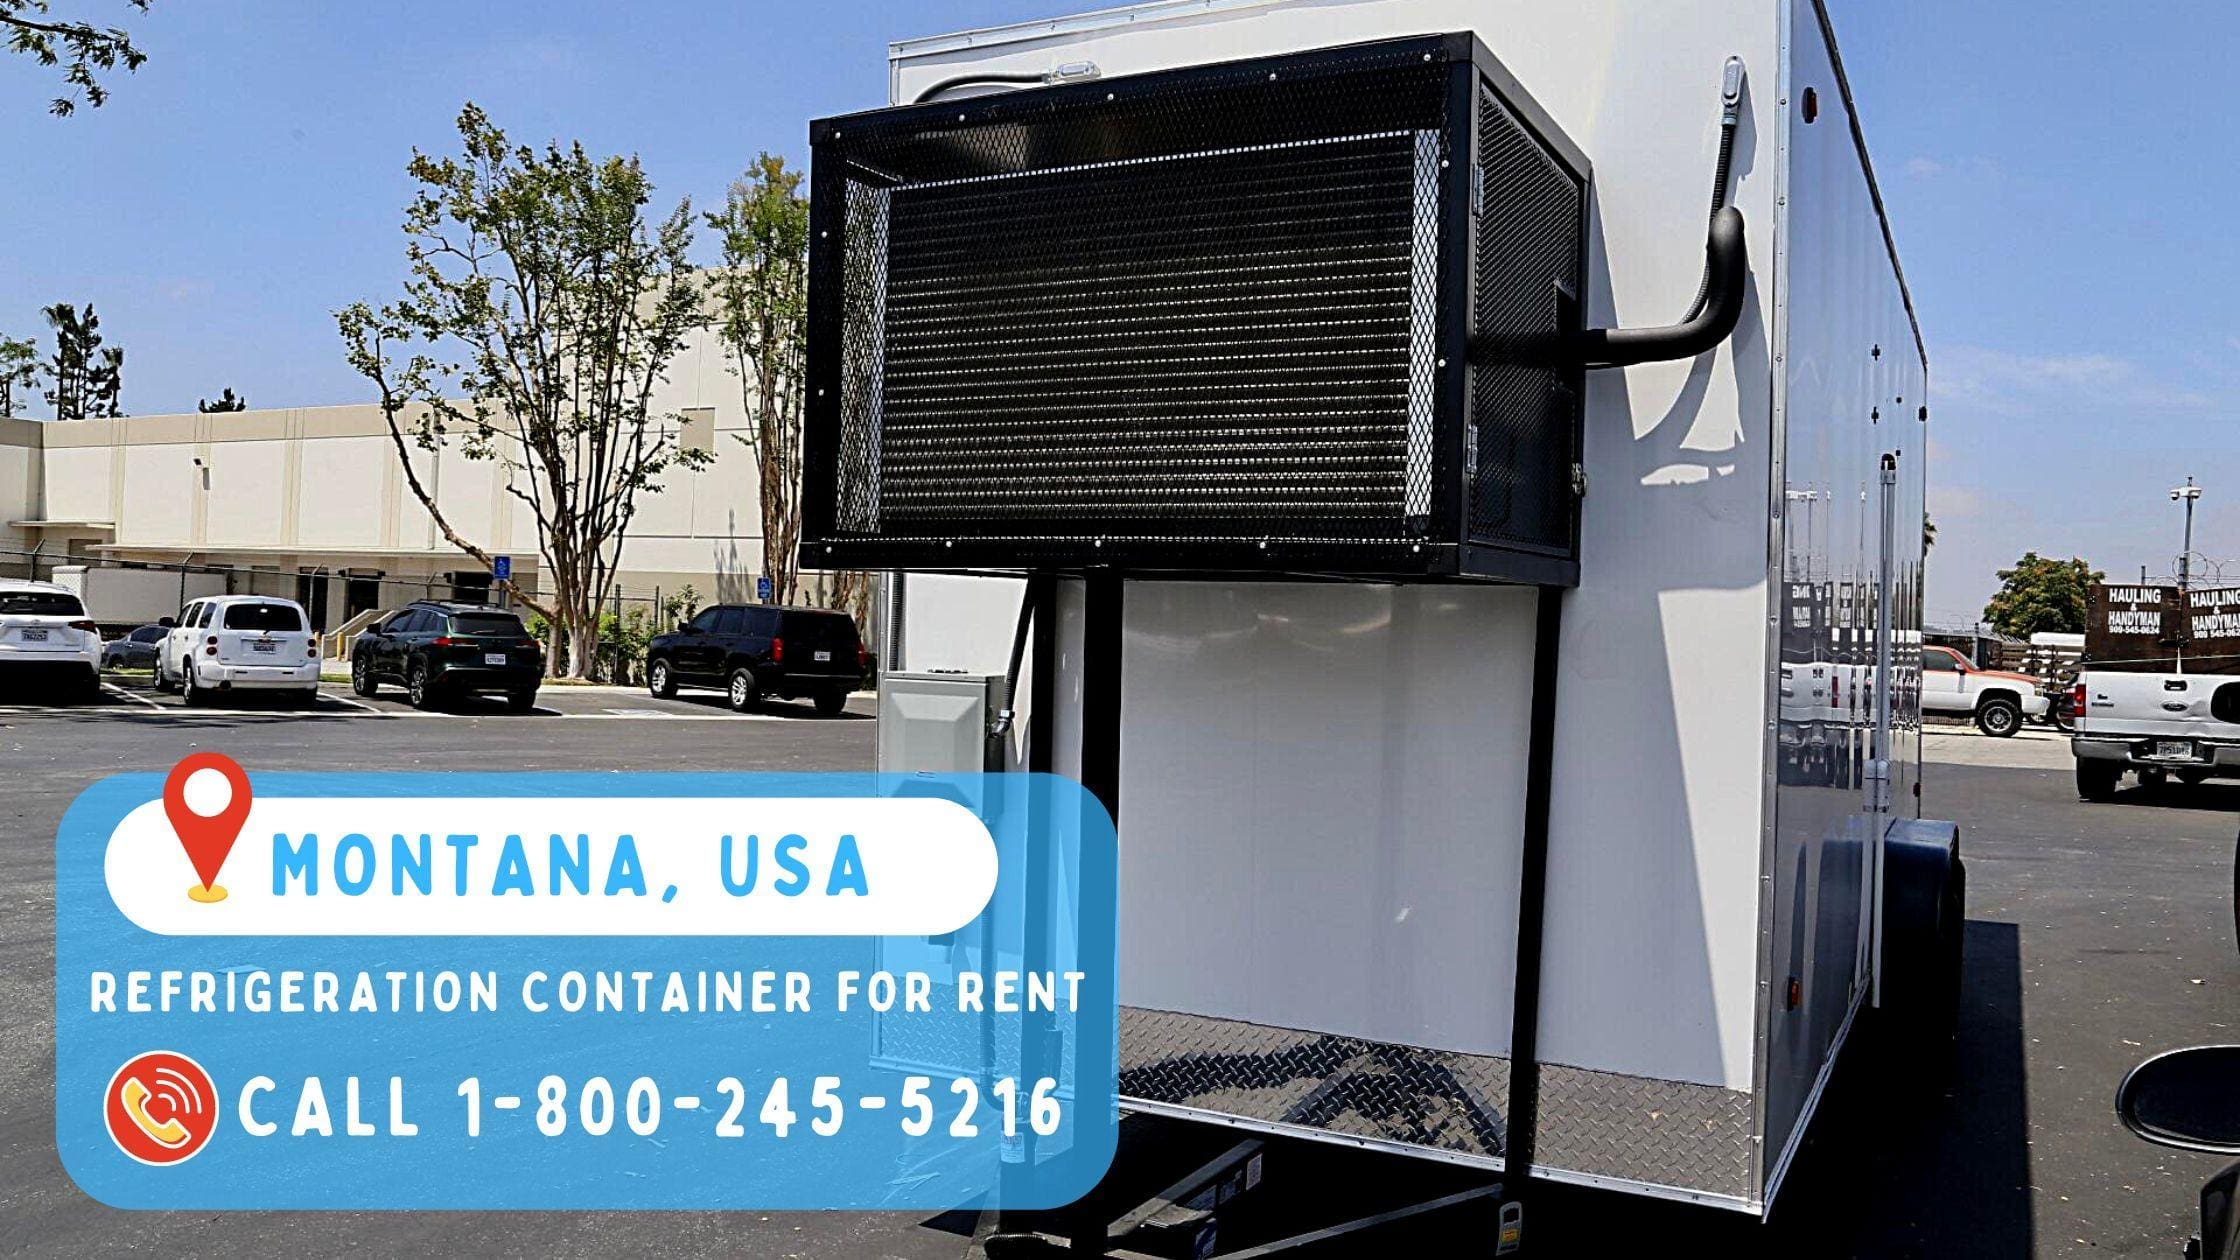 https://b3366852.smushcdn.com/3366852/wp-content/uploads/2023/01/Refrigeration-Container-for-rent-in-Montana-1.jpg?lossy=2&strip=1&webp=1